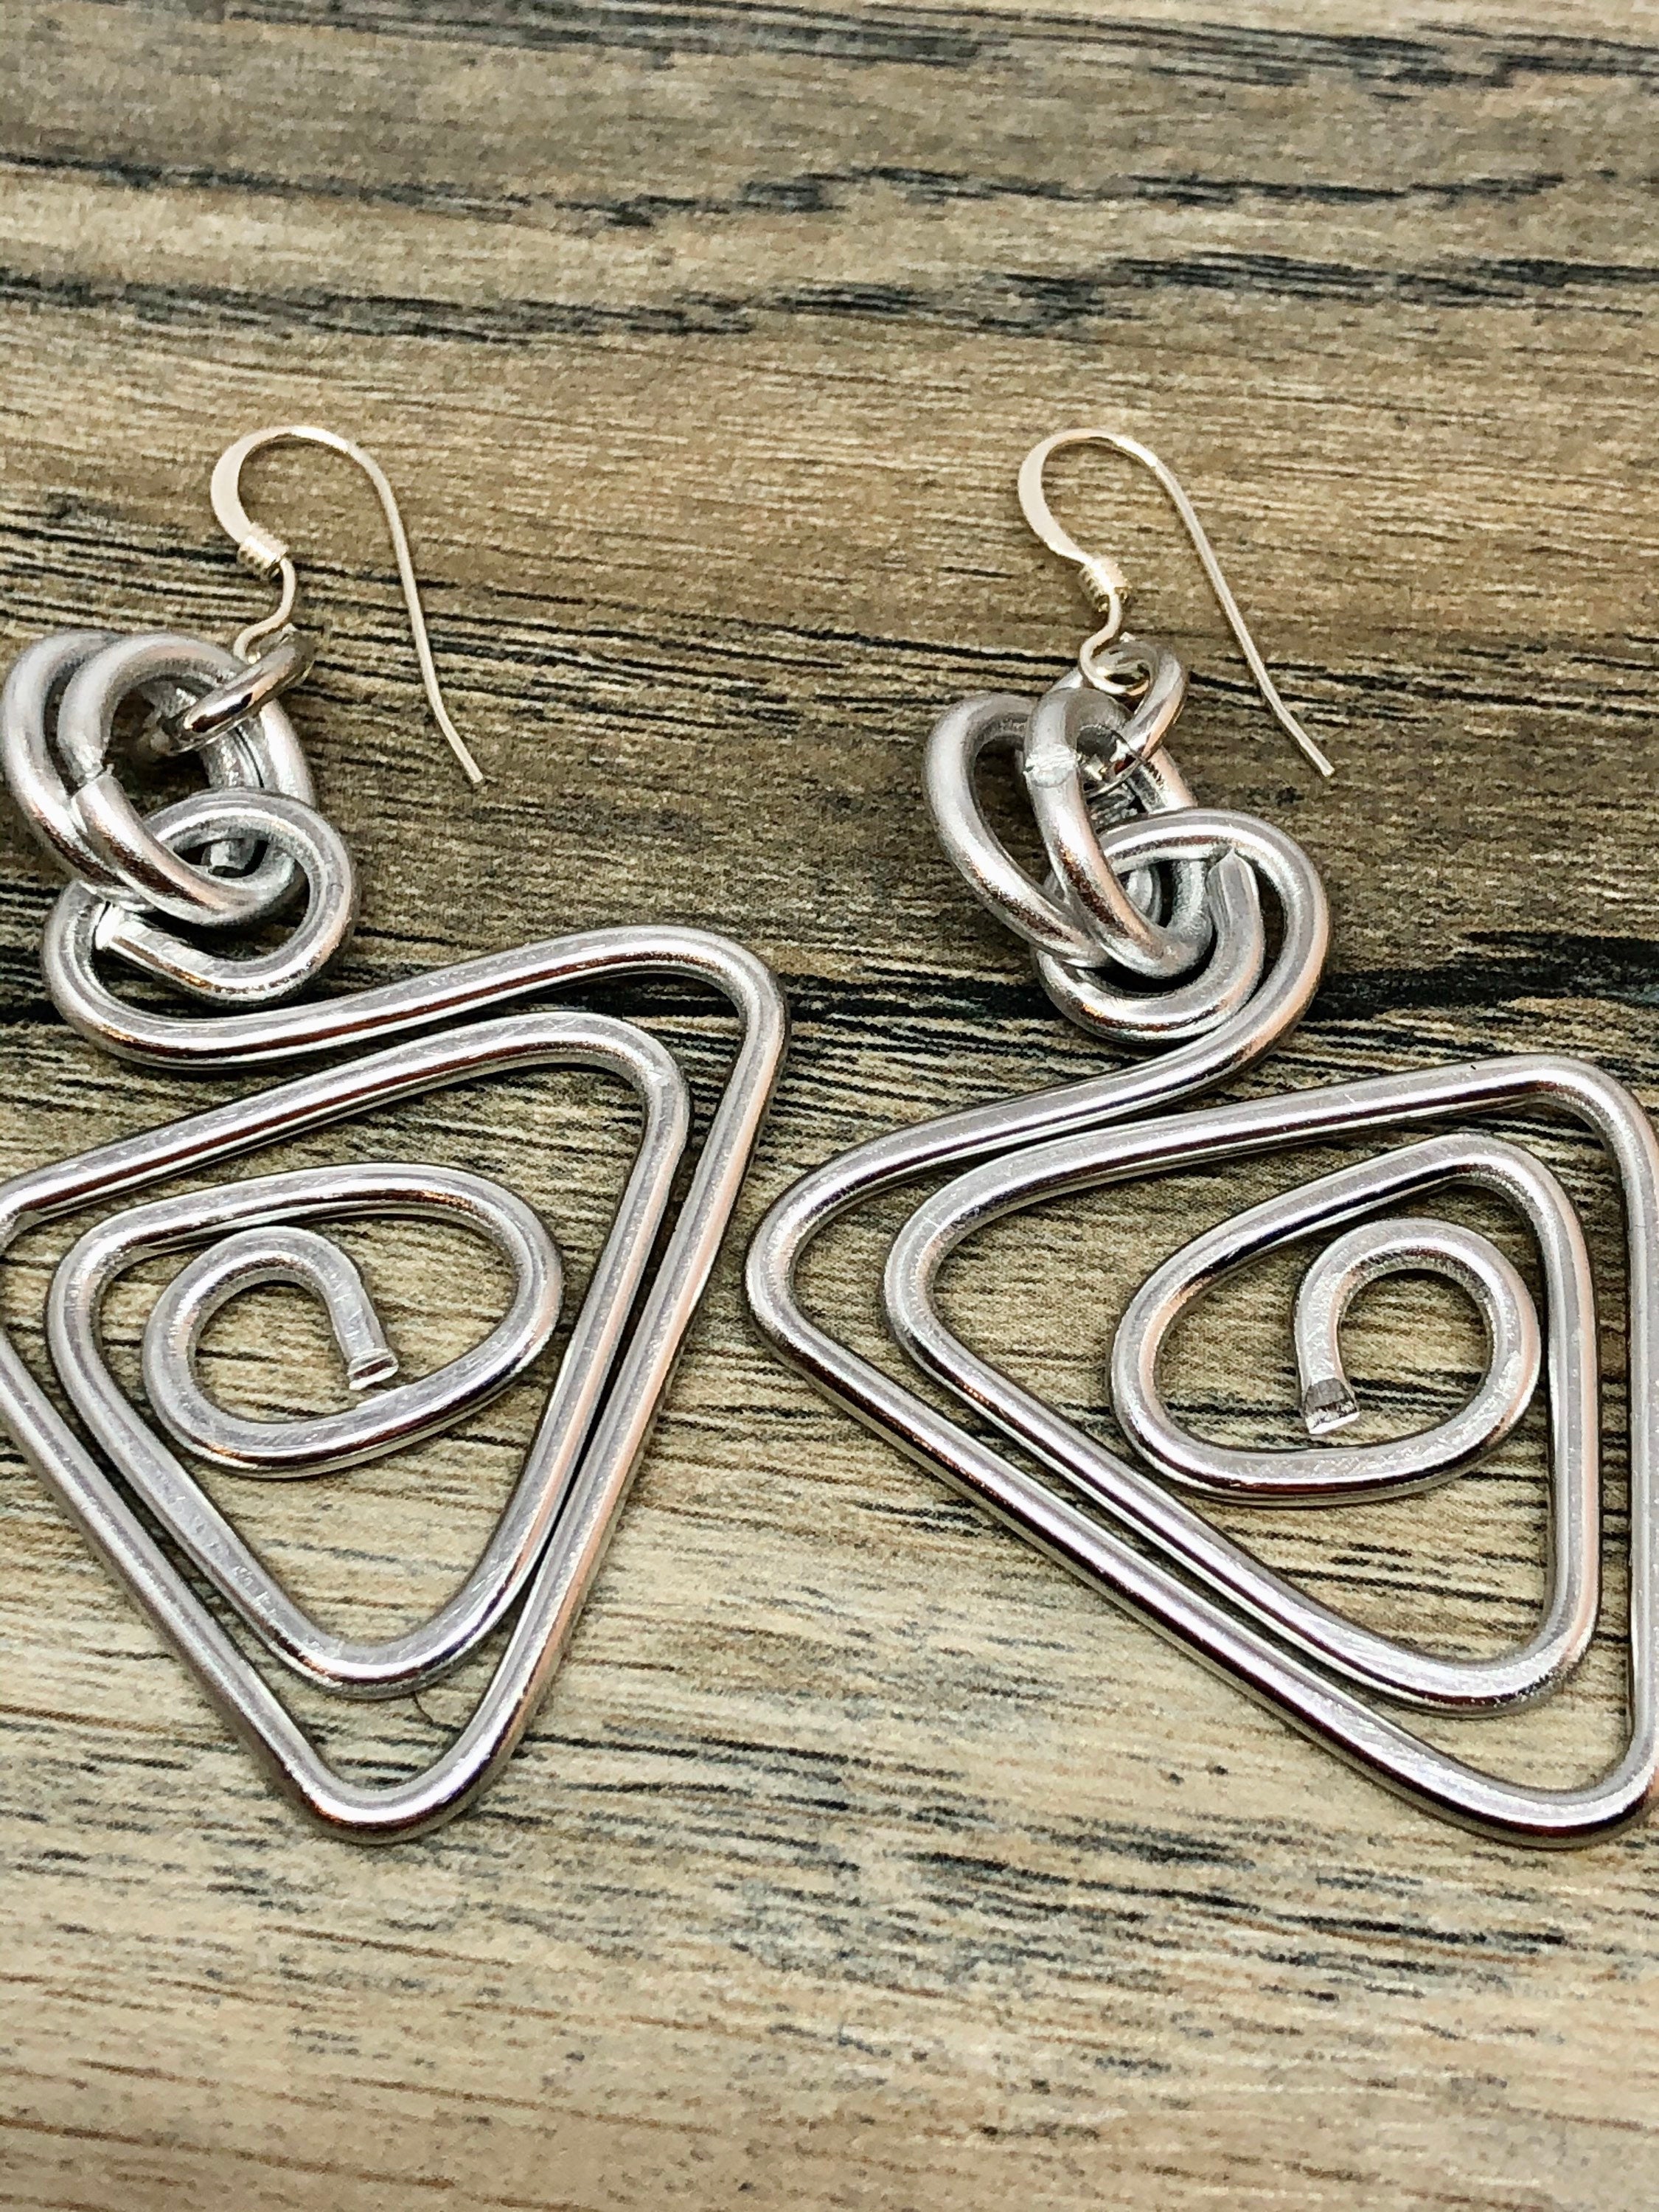 Silver Triangle Earrings with sterling silver ear-wires, Little everyday earrings